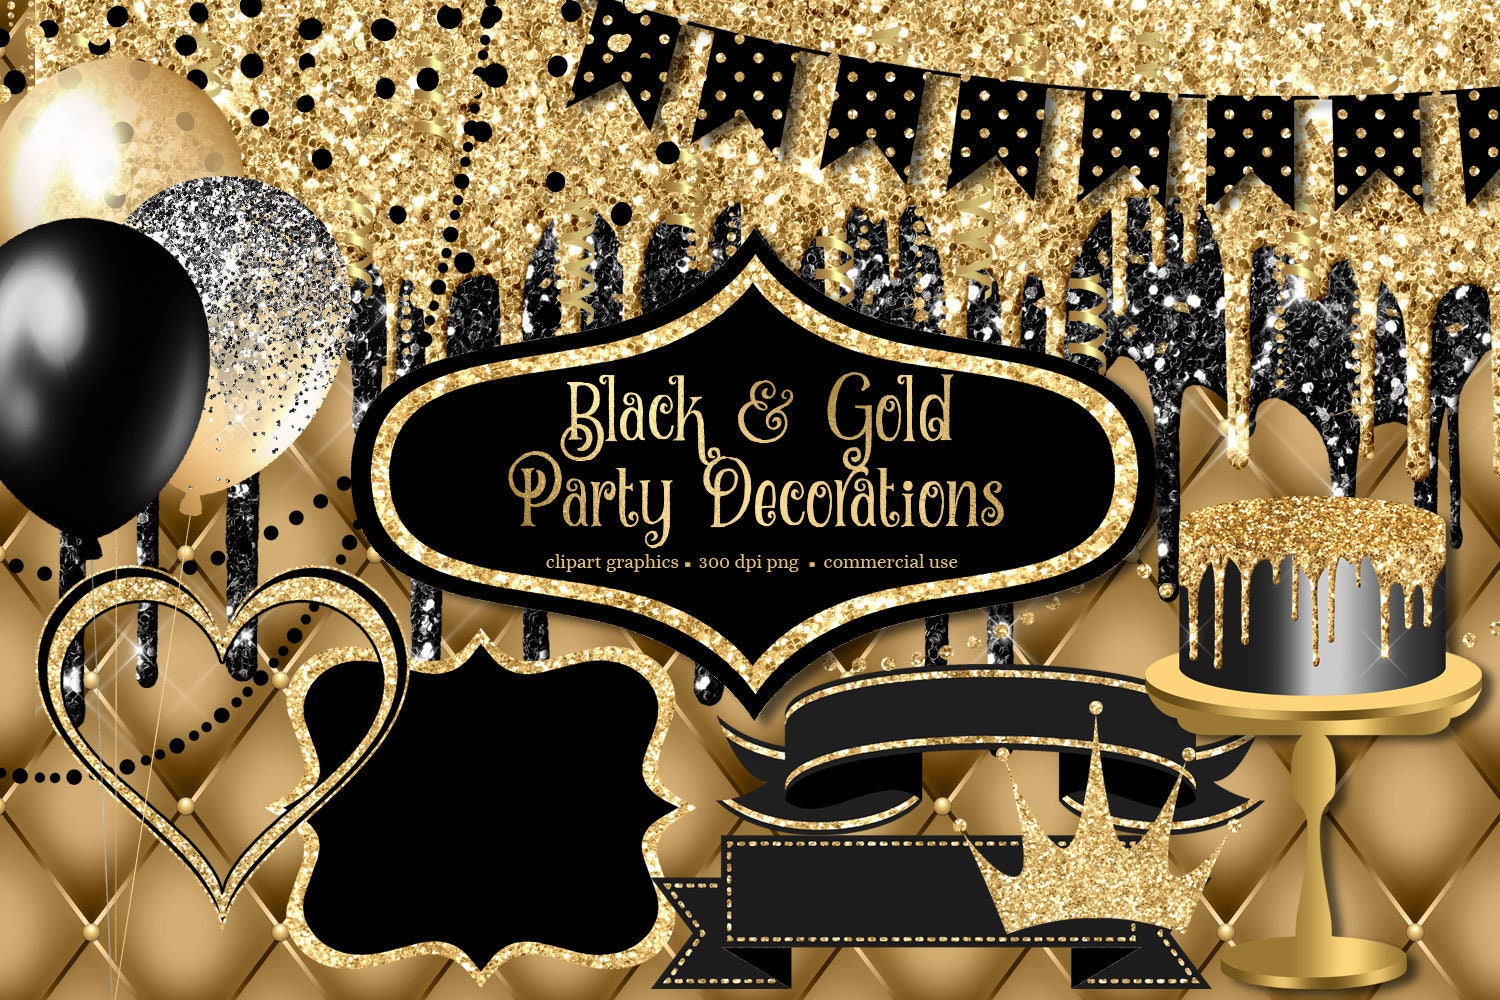 Black and Gold Party Decorations Clip Art With Frames and - Etsy ...